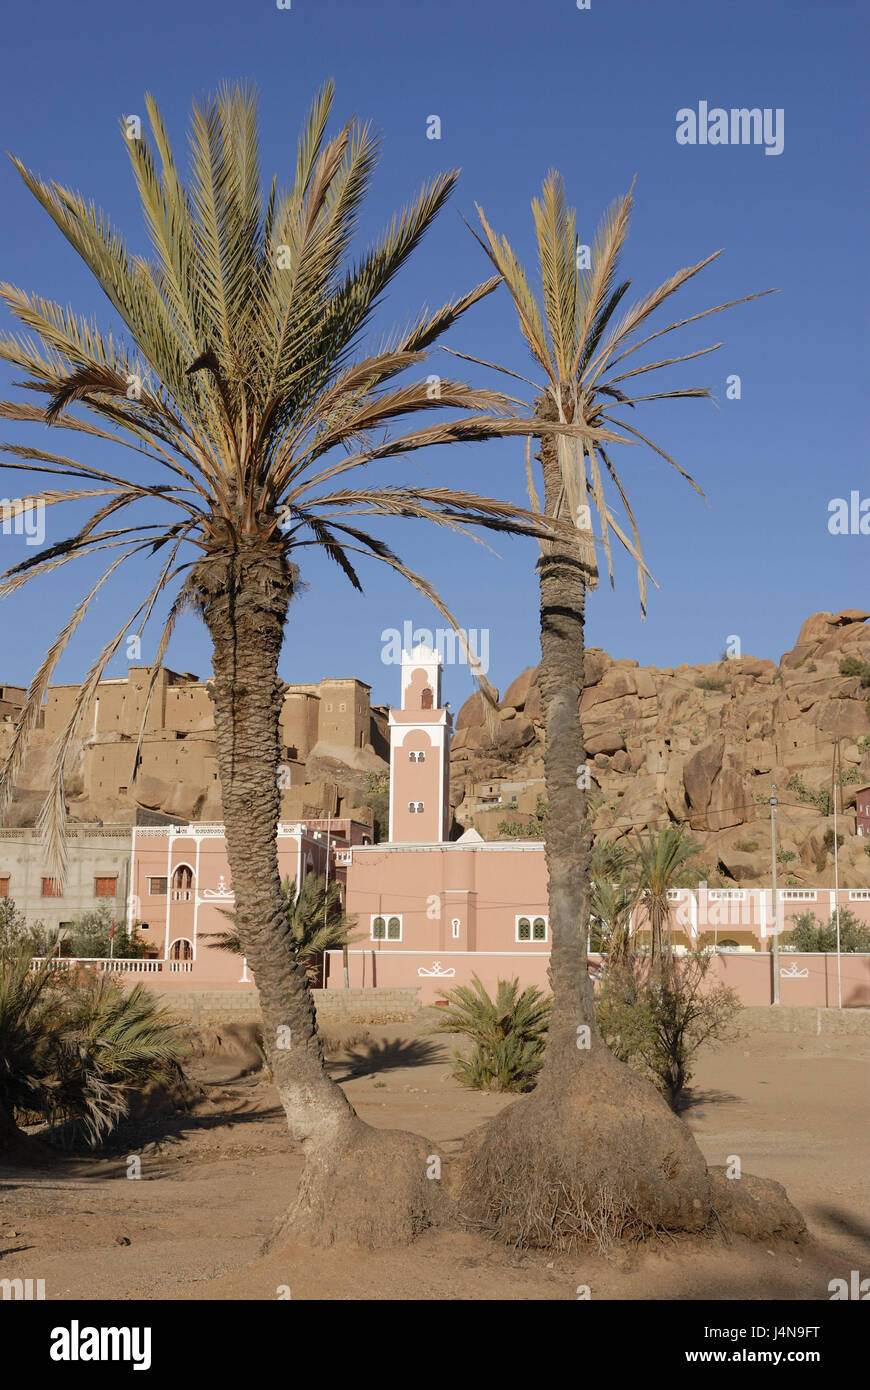 Morocco, Tafraoute, mosque, palms, Africa, anti-atlas, rock, mountains, building, faith, religion, Islam, minaret, pink, travel, North Africa, place of interest, destination, Stock Photo